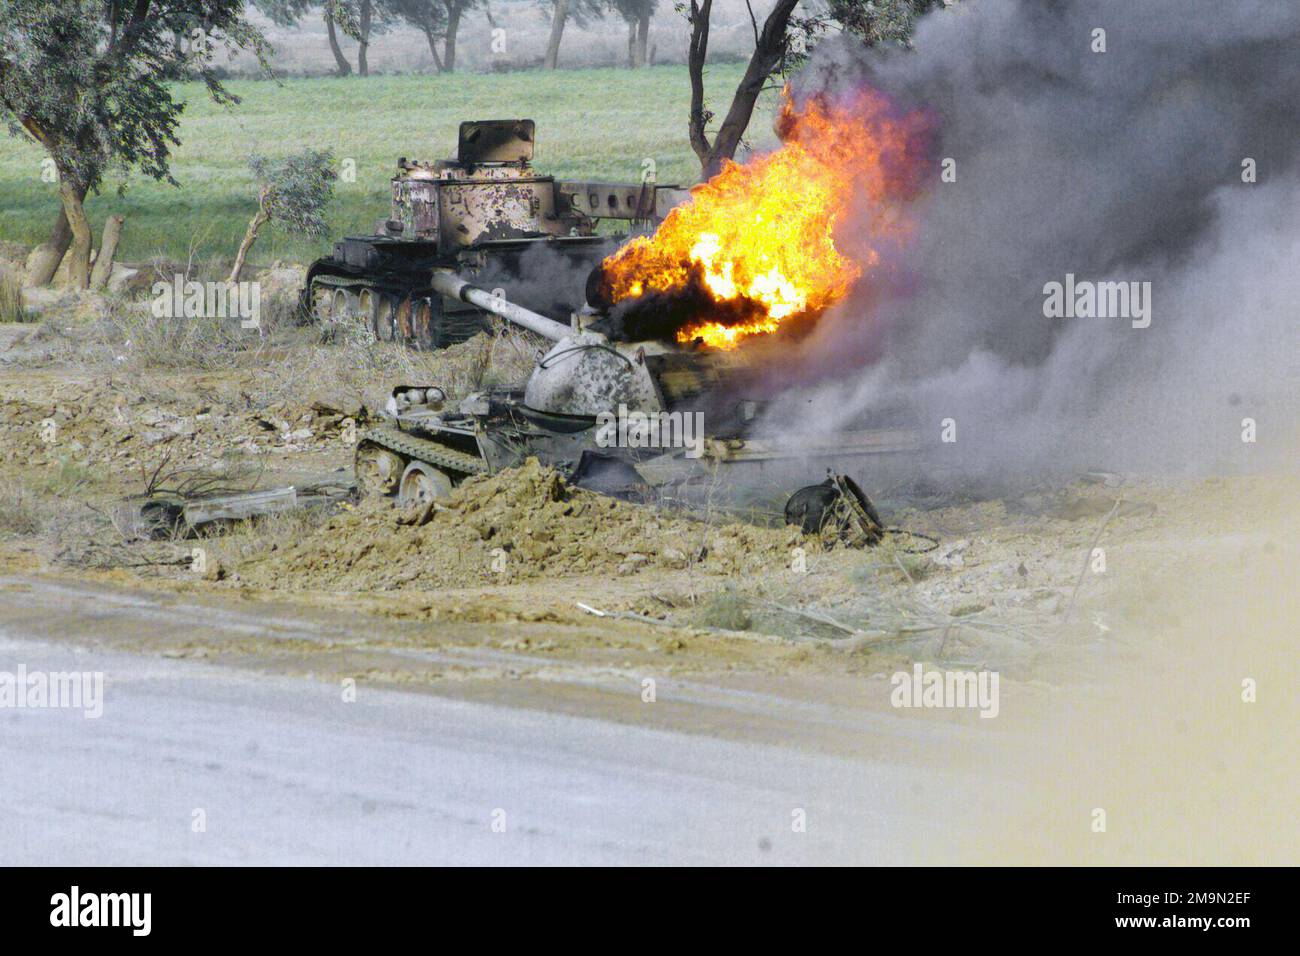 The burning remains of an T-55 Medium Battle Tank (MBT) near the An Nu'maniyah Bridge along Highway 27 during Operation IRAQI FREEDOM. IRAQI FREEDOM is the multinational coalition effort to liberate the Iraqi people, eliminate Iraq's weapons of mass destruction and end the regime of Saddam Hussein. Country: Iraq (IRQ) Stock Photo